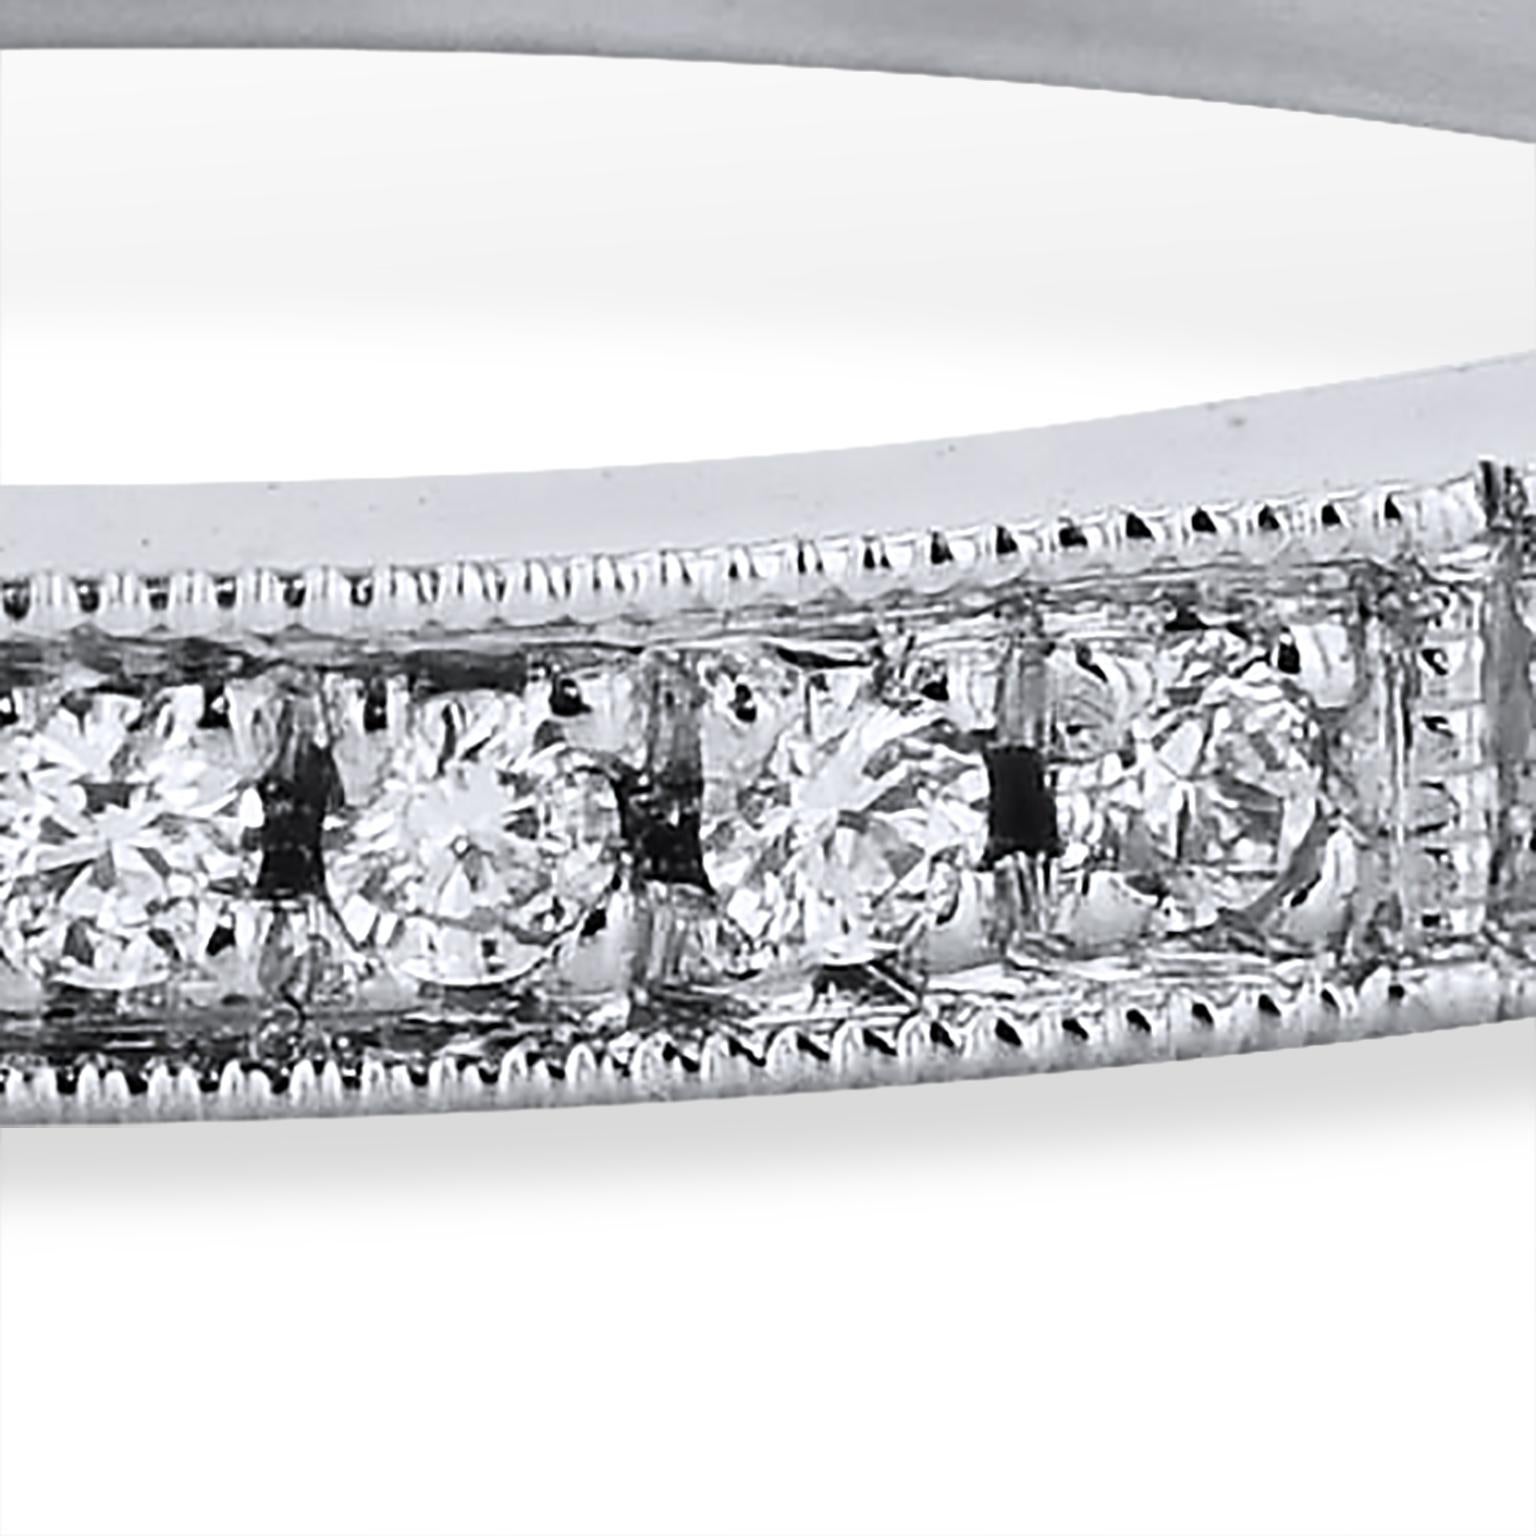 0.19 Carat Round Diamond Pave Platinum Eternity Band Ring Handmade by H&H Jewels

This handmade band ring features 0.19 carat of round diamonds (G/H/VS) pave-set on a platinum band. This ring provides a mosaic of light and color that twinkles with